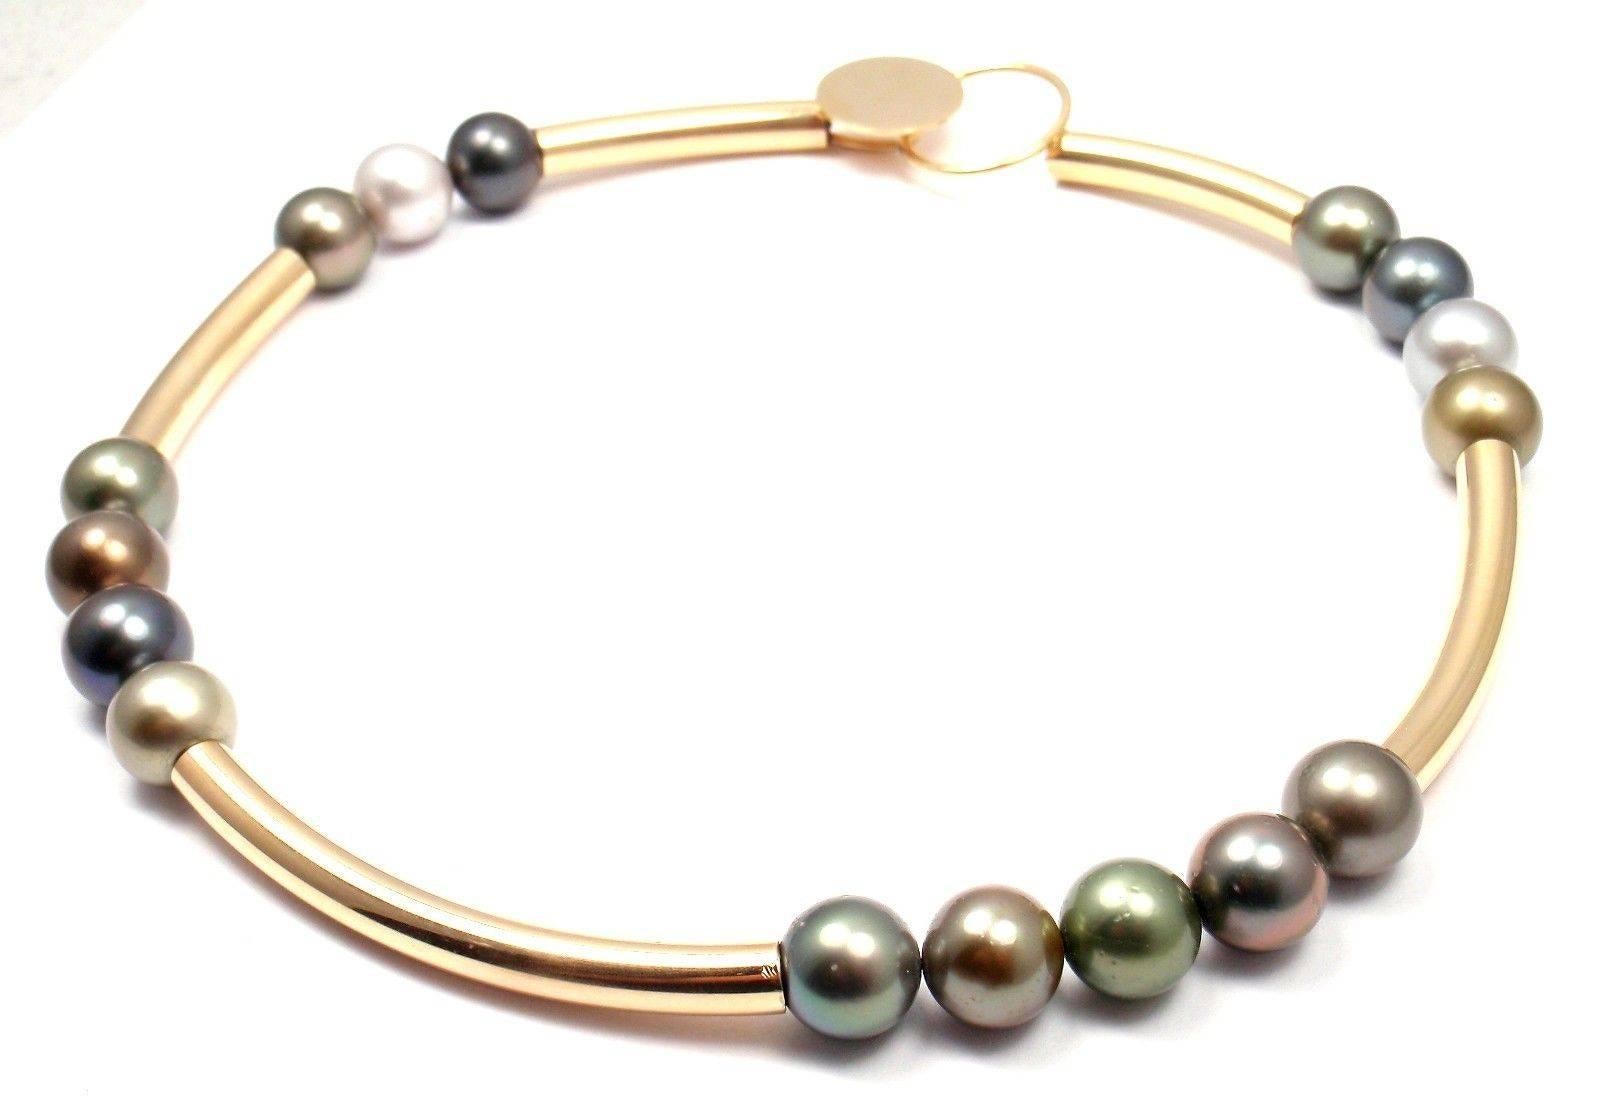 14k Yellow Gold Large Tahitian Pearls Modernist Necklace by Betty Cooke.  
With 16 Large Tahitian Pearls 11.5mm - 11mm.

Details:  
Length: 16